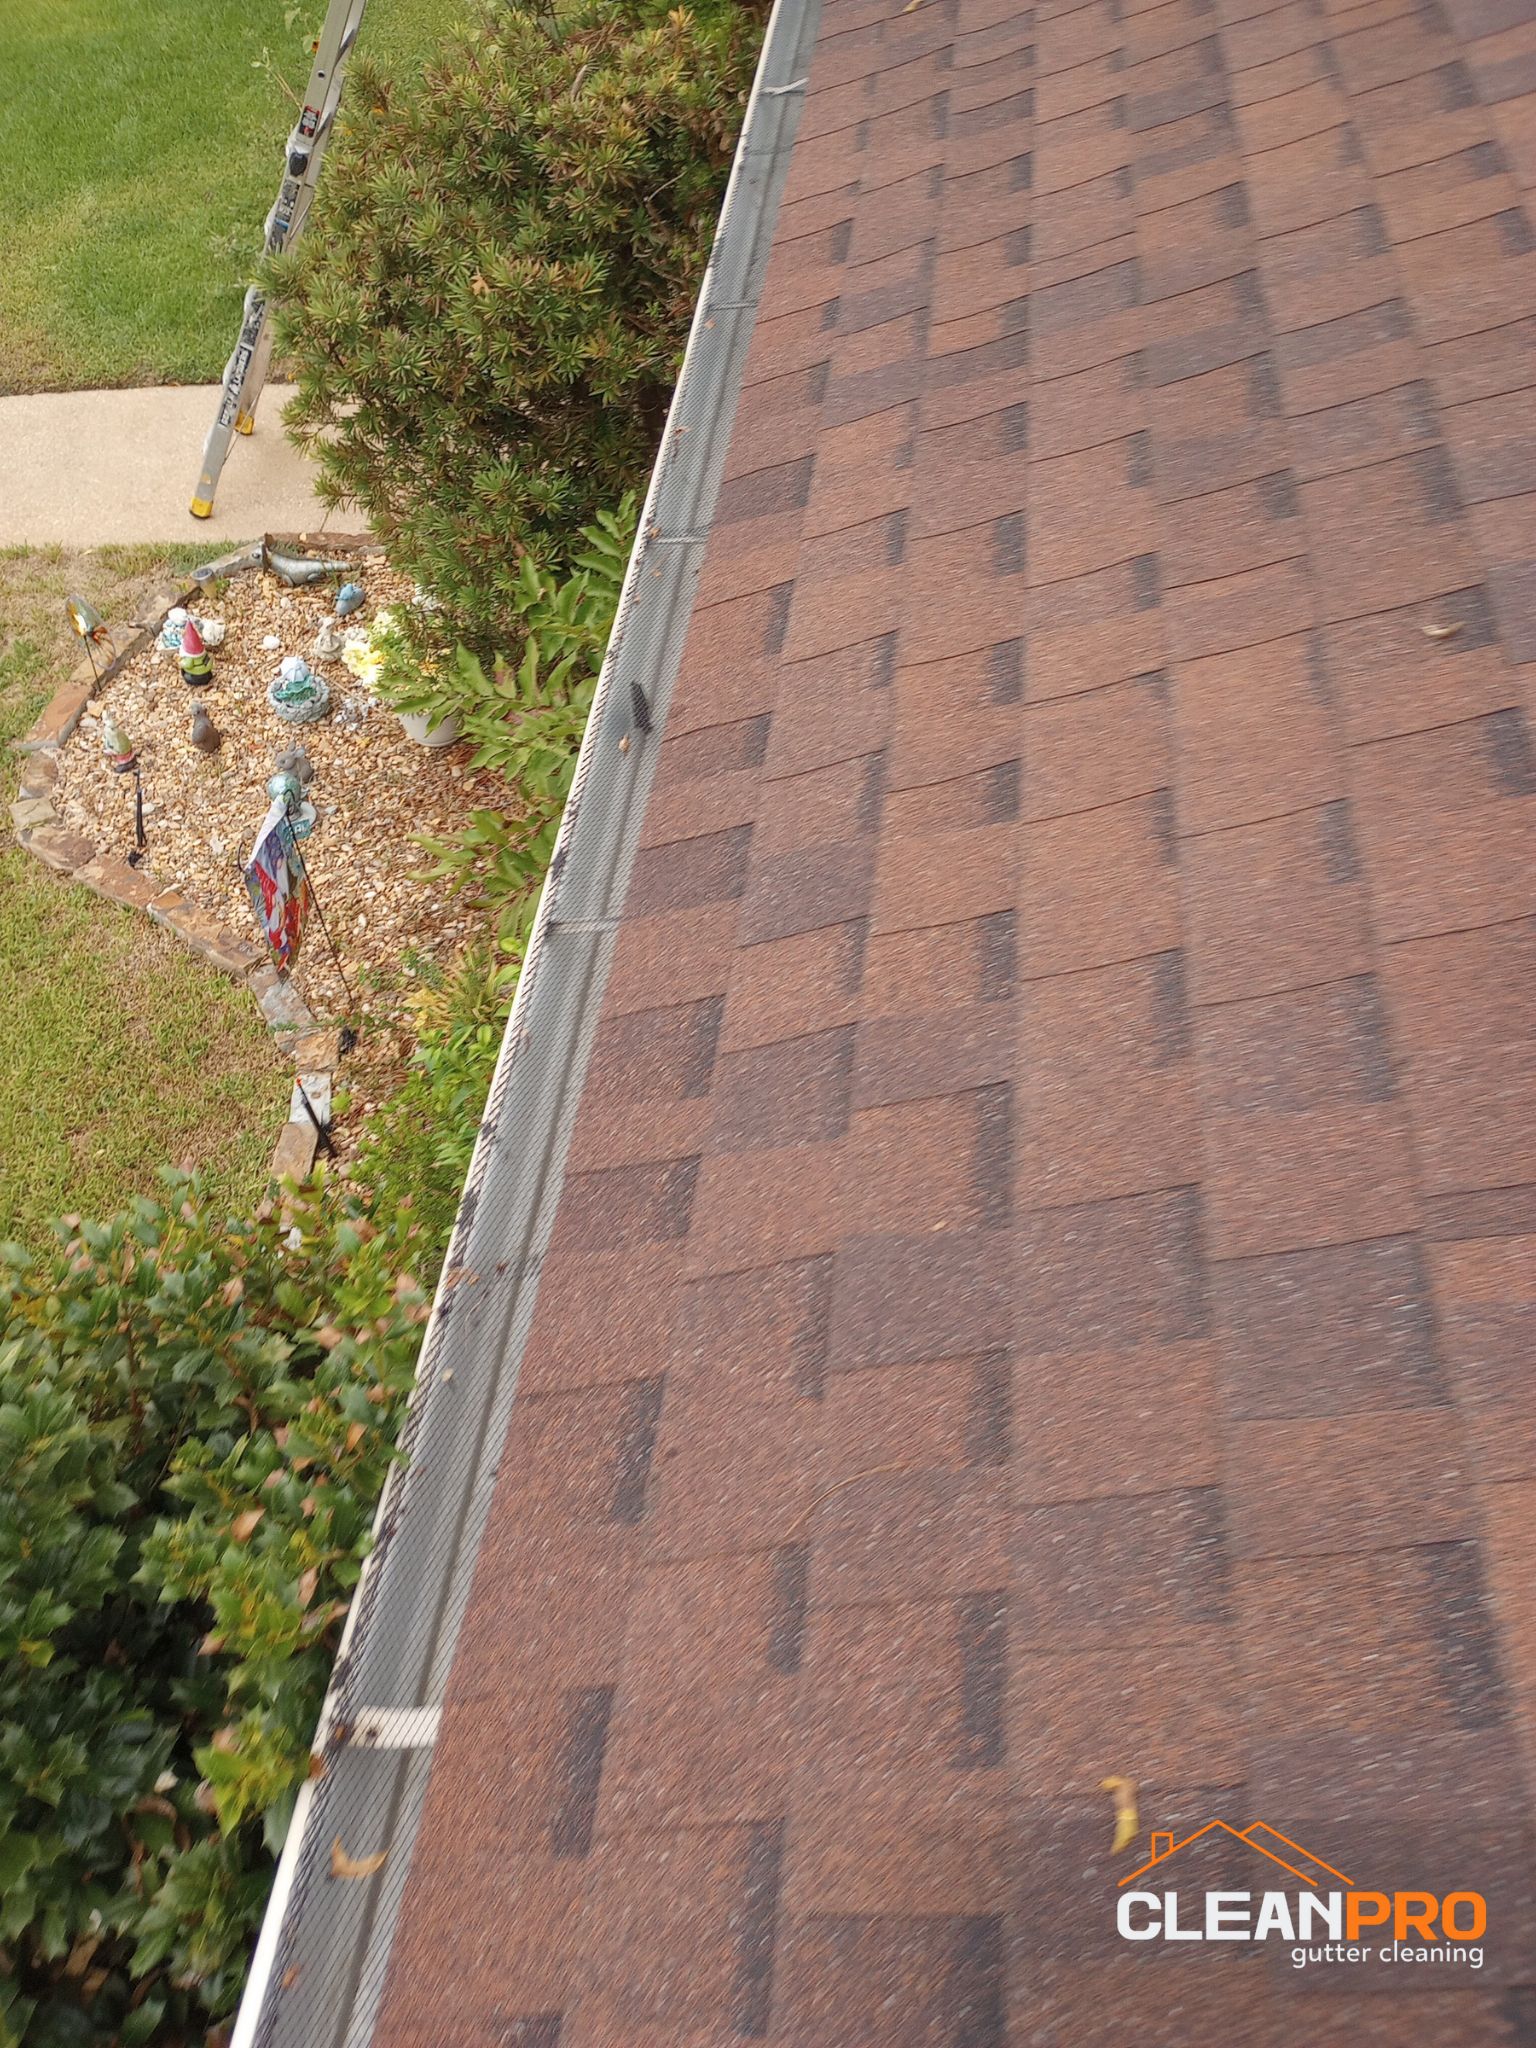 Top Notch Gutter Cleaning Service in Dallas